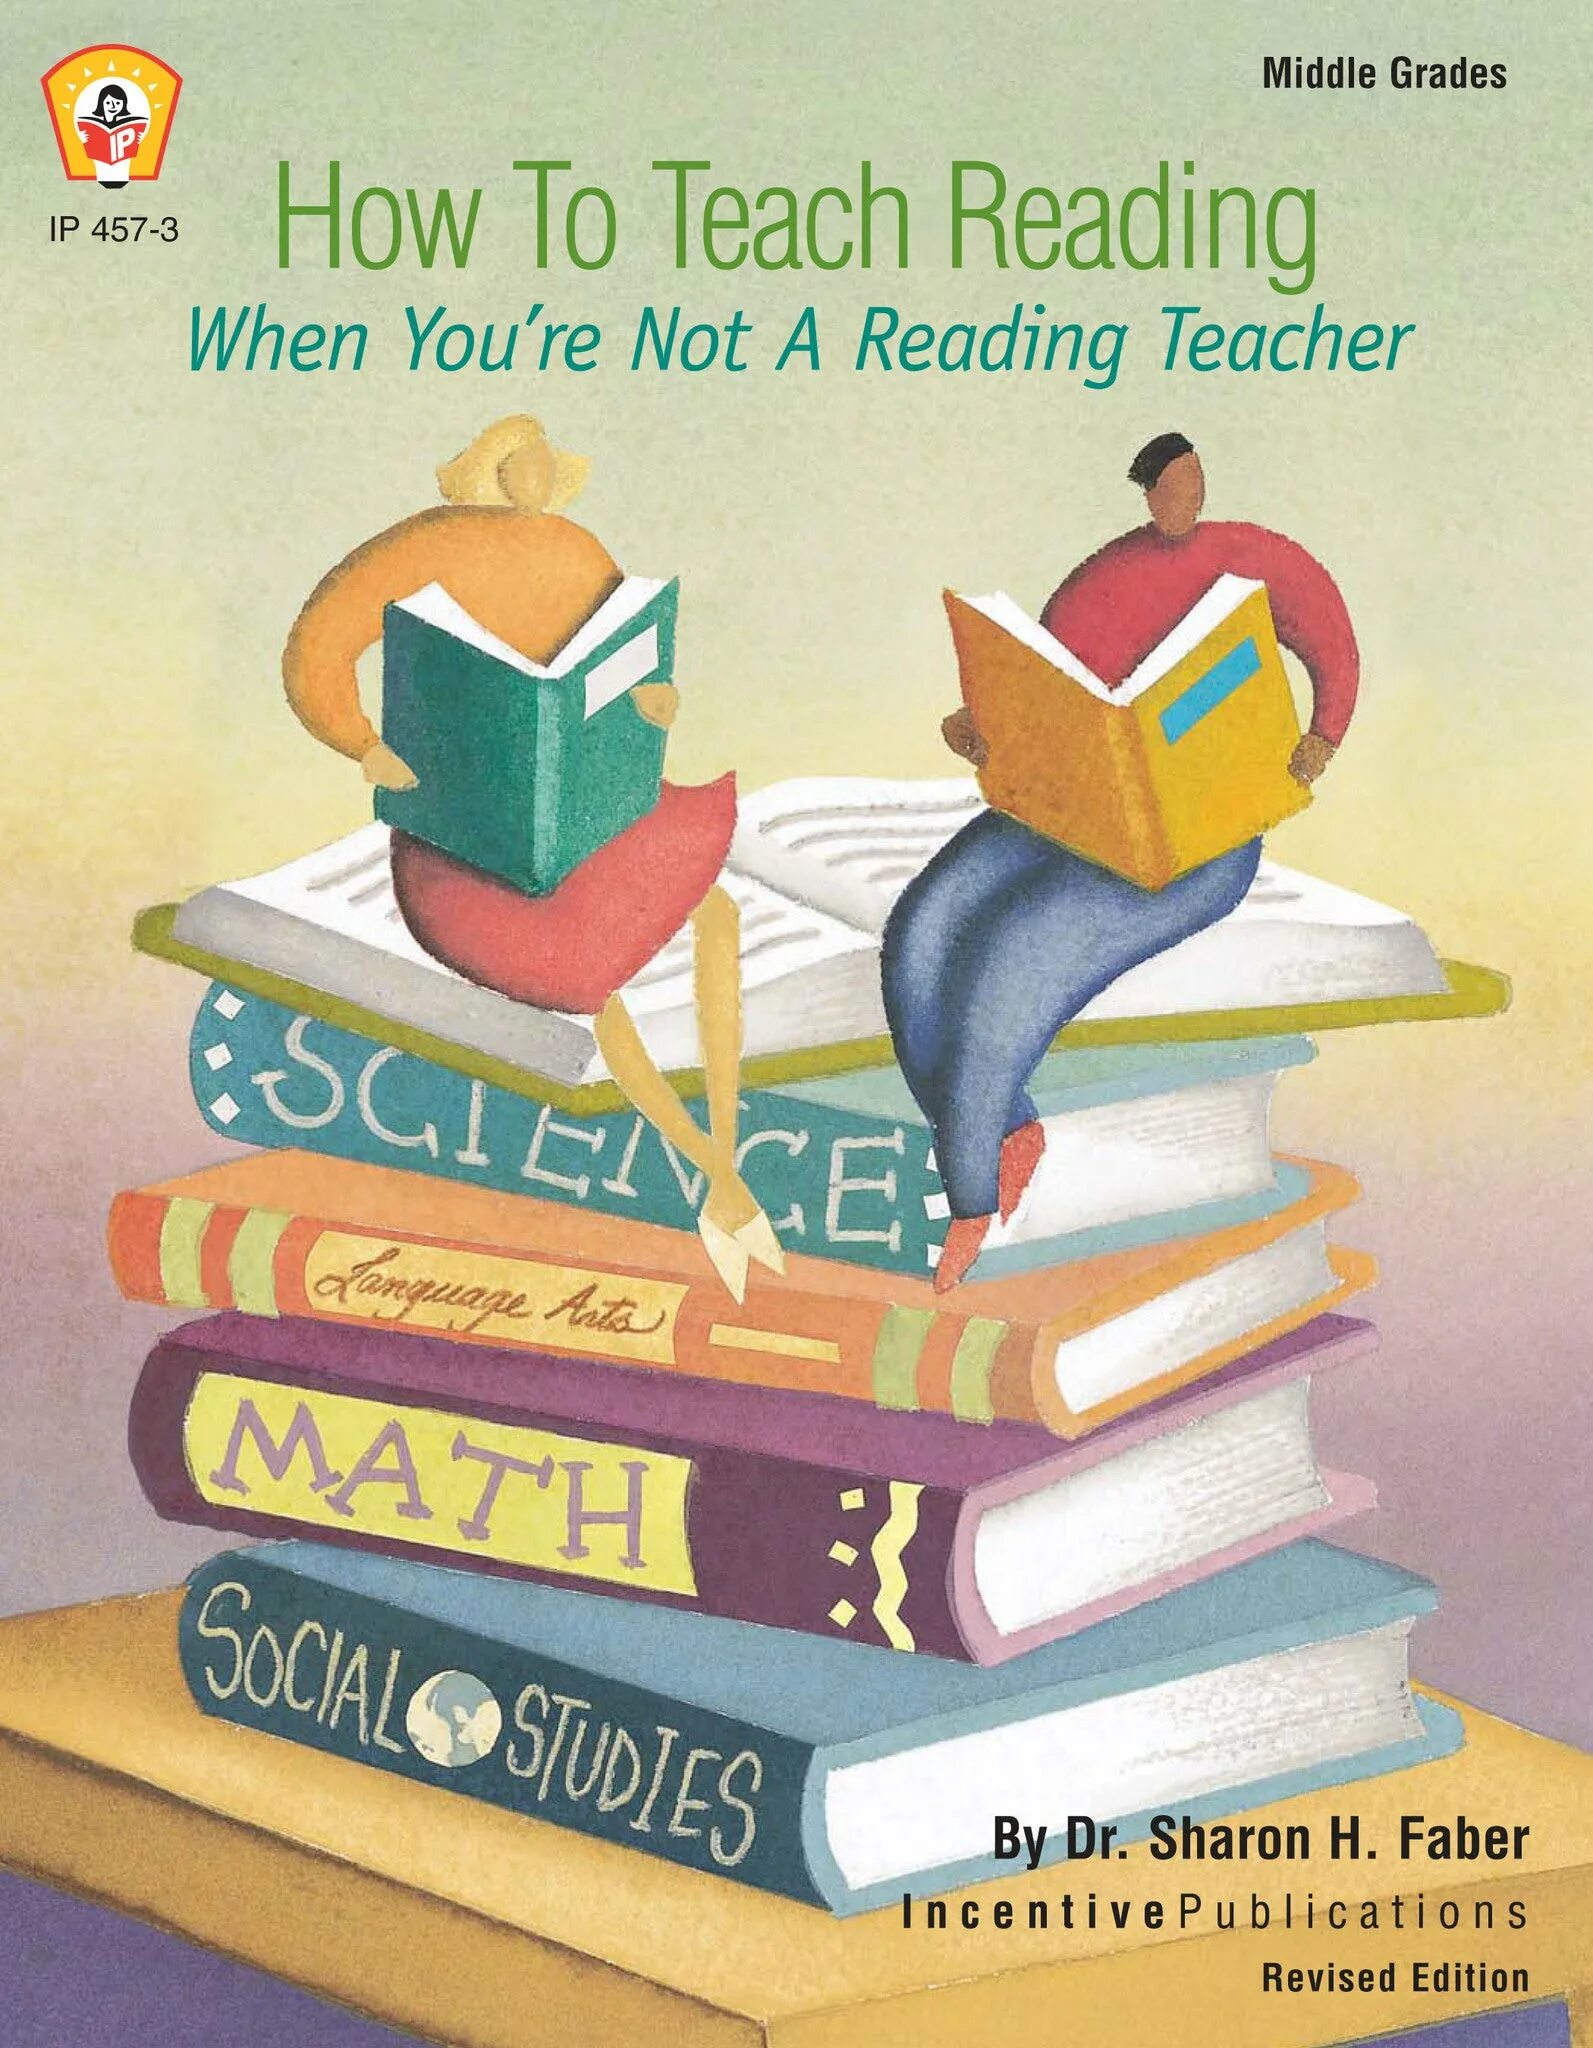 When reading this books the speaker. How to teach reading. Method teaching of reading for Kids. How to teach reading book. How to teach reading effectively..